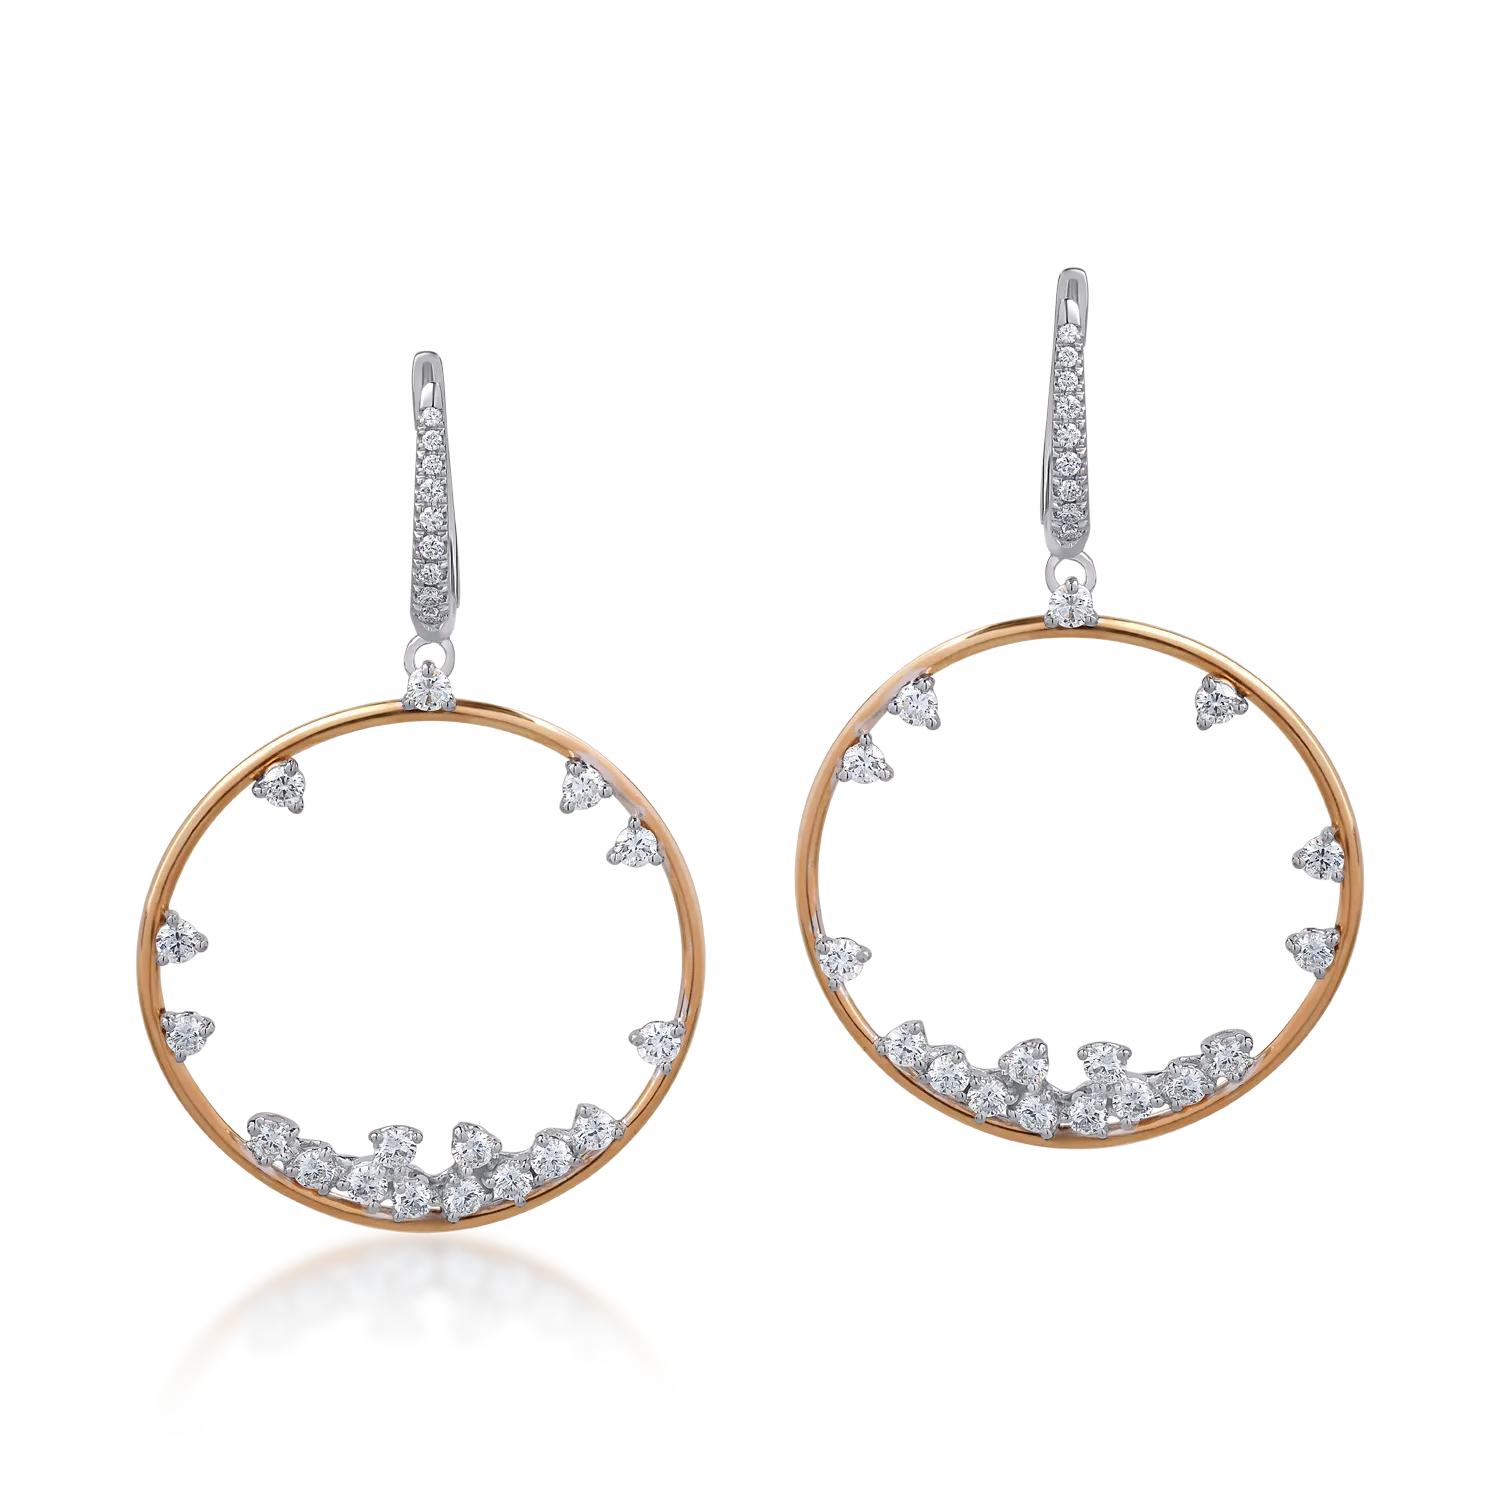 18K yellow-white gold earrings with 1.8ct diamonds